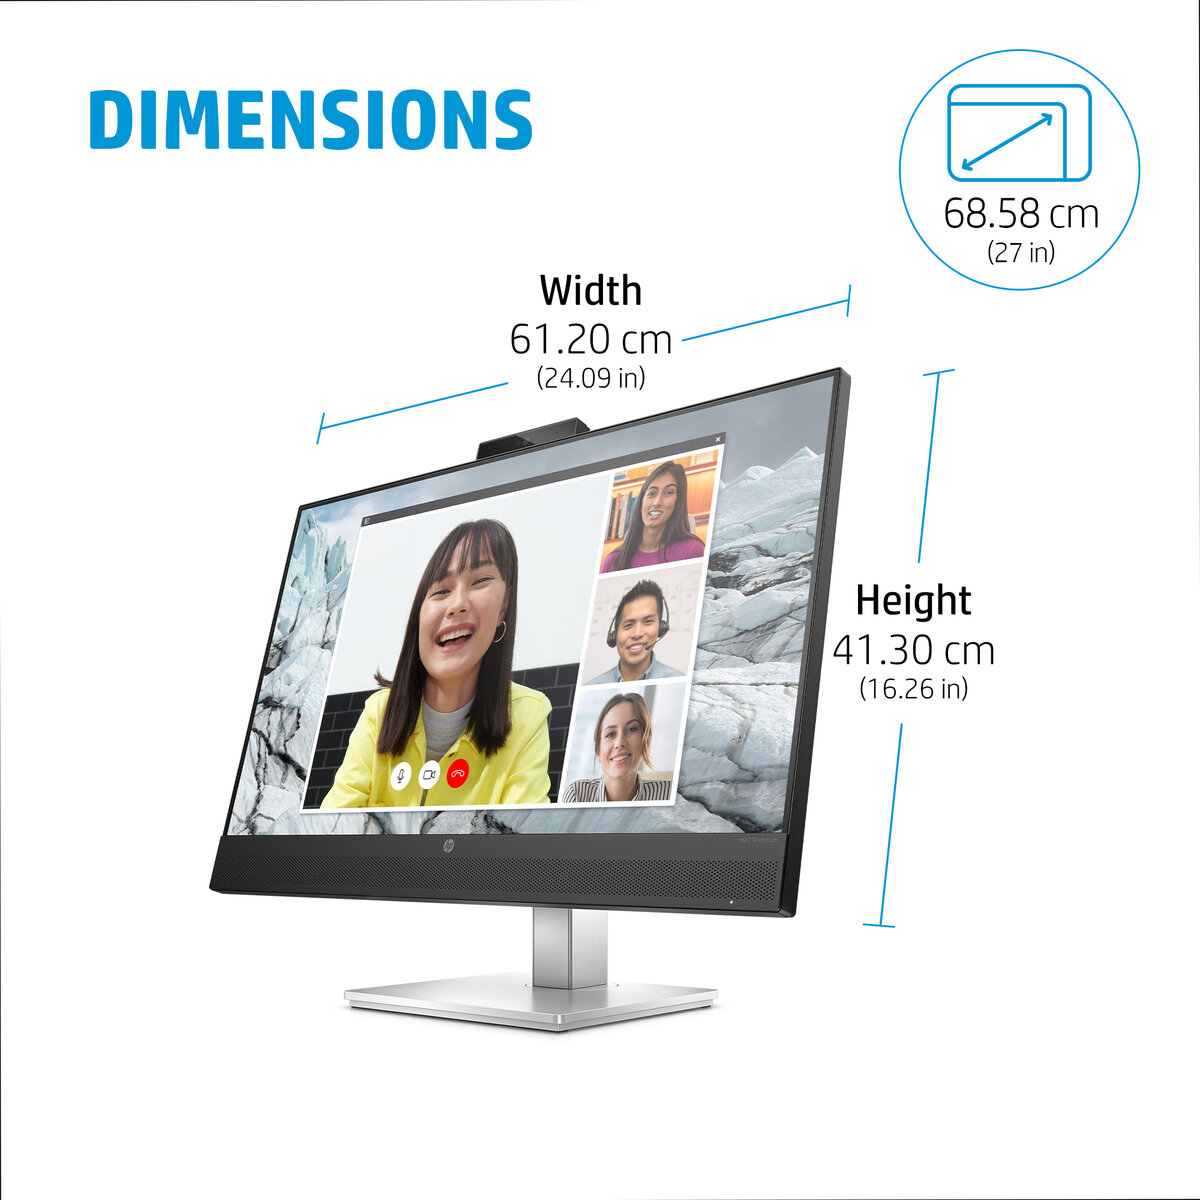 HP E27m G4 QHD USB-C Conferencing Monitor Review